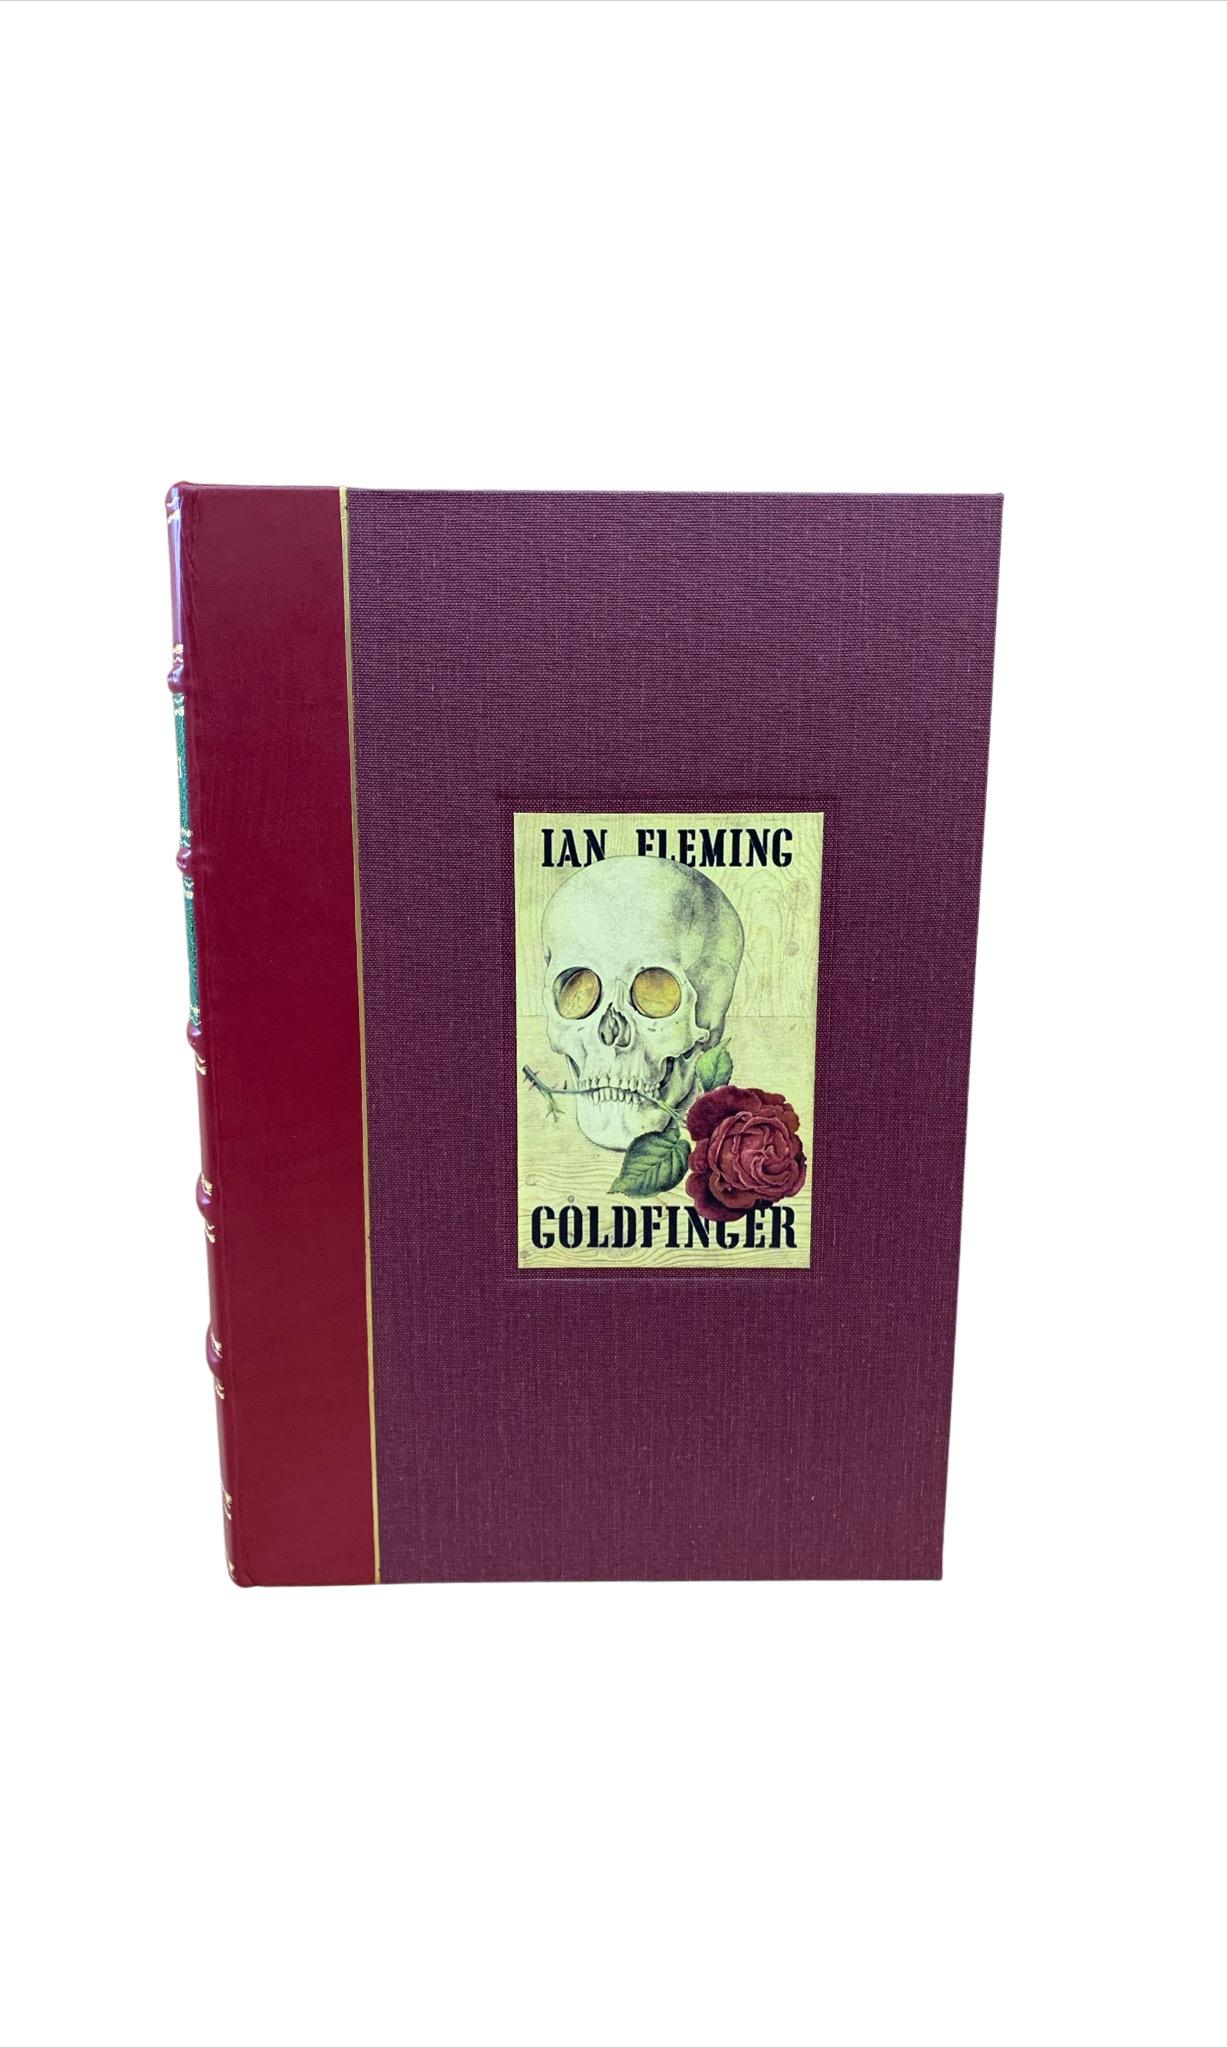 Mid-20th Century Goldfinger, Signed by Ian Fleming, First American Edition, First Printing, 1959